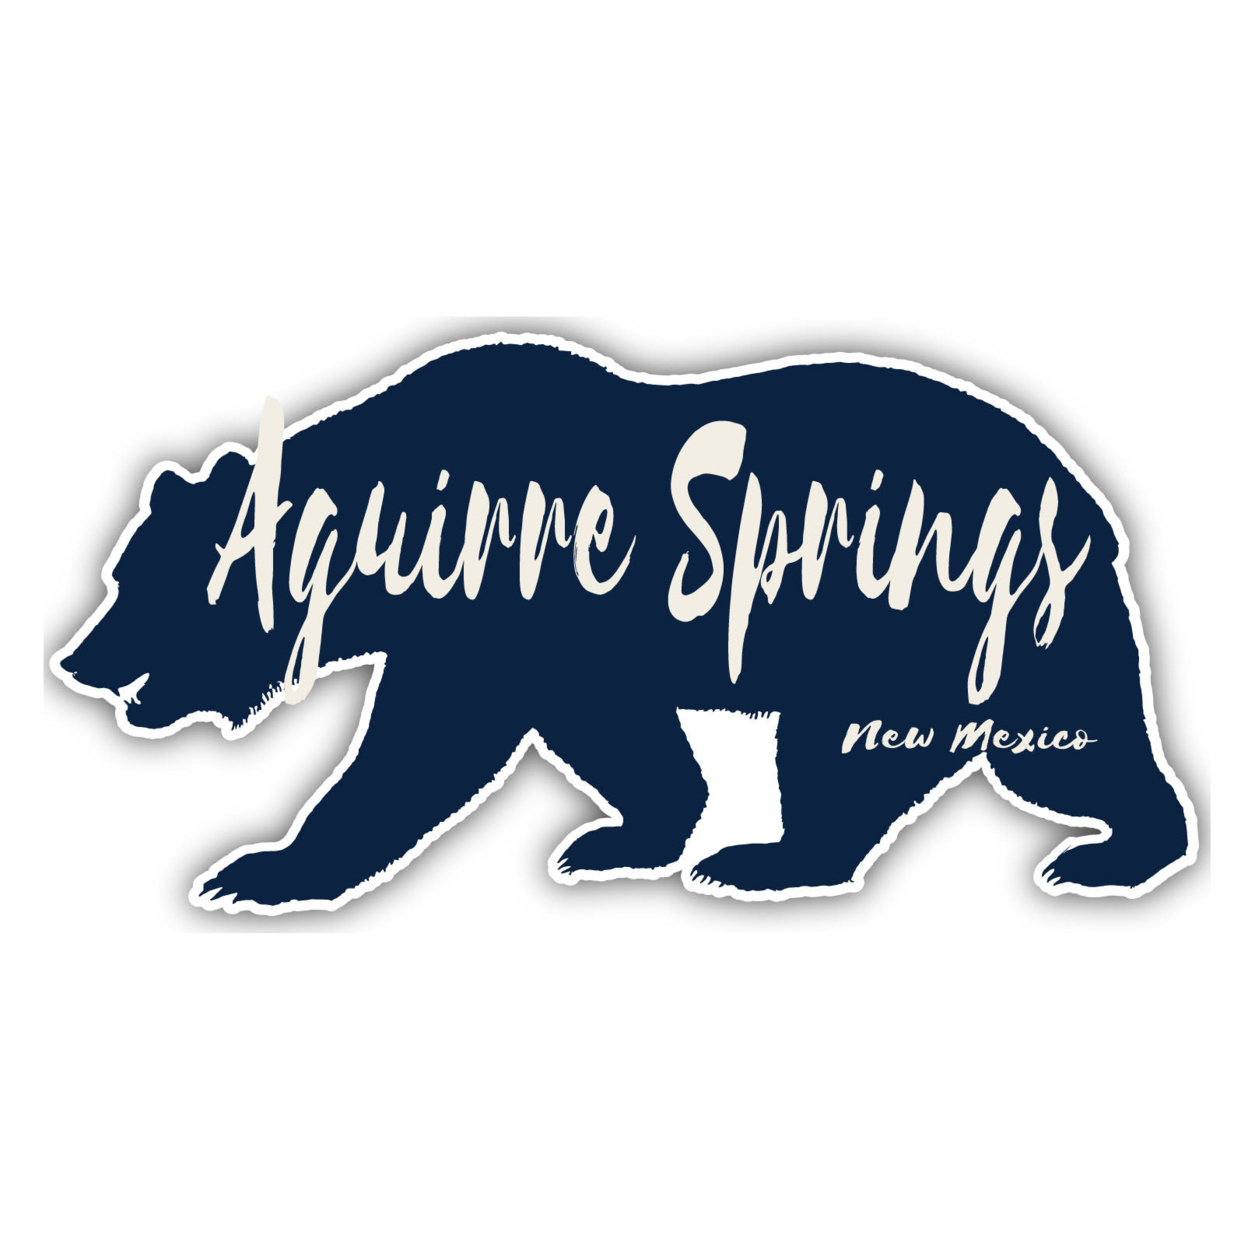 Aguirre Springs New Mexico Souvenir Decorative Stickers (Choose Theme And Size) - Single Unit, 12-Inch, Bear